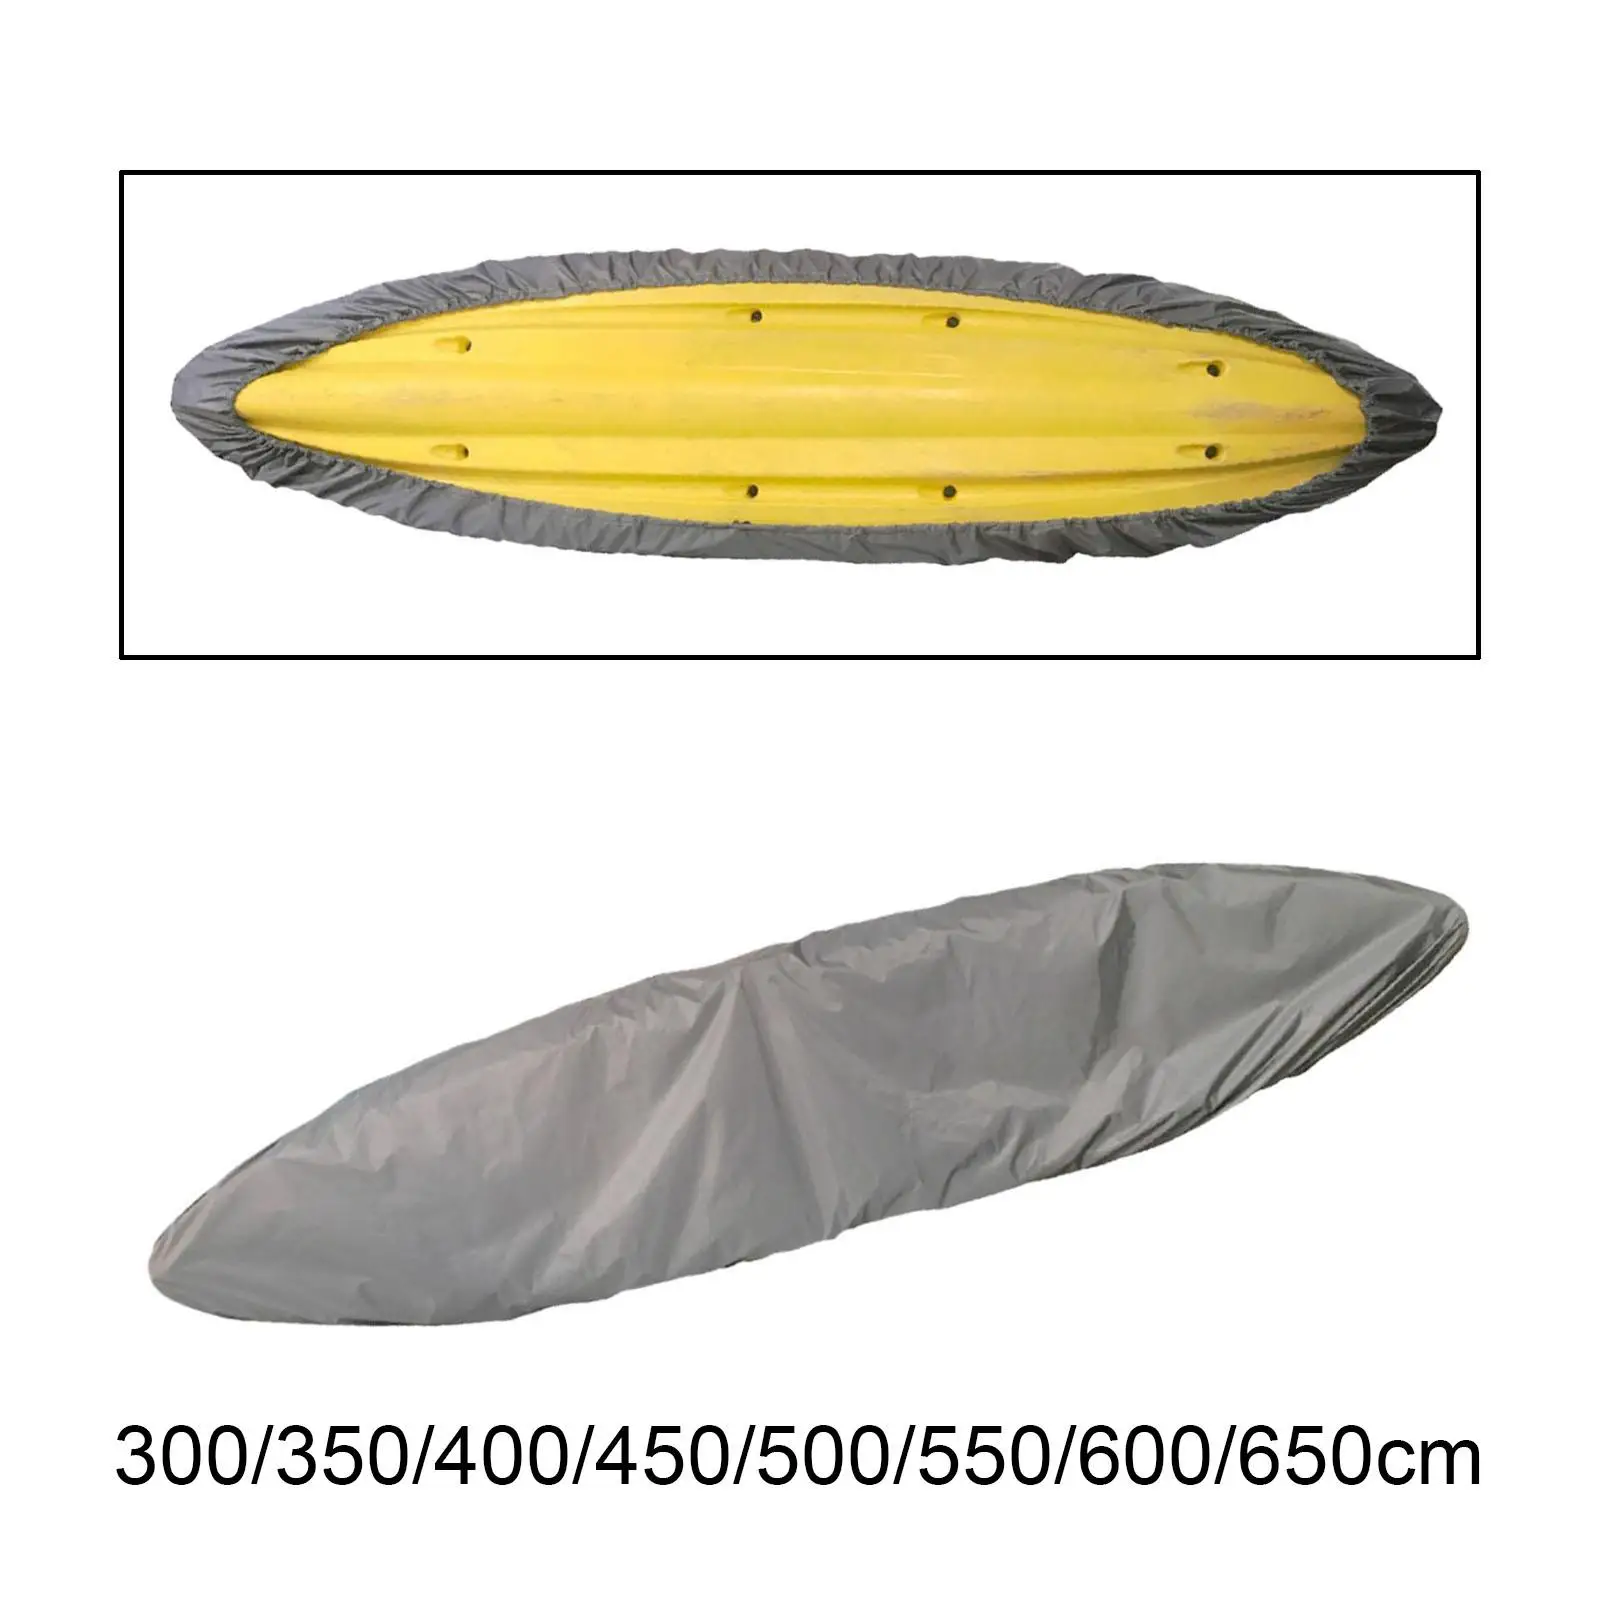 Boat storage dust cover, canoe cover, indoor outdoor storage dust cover,